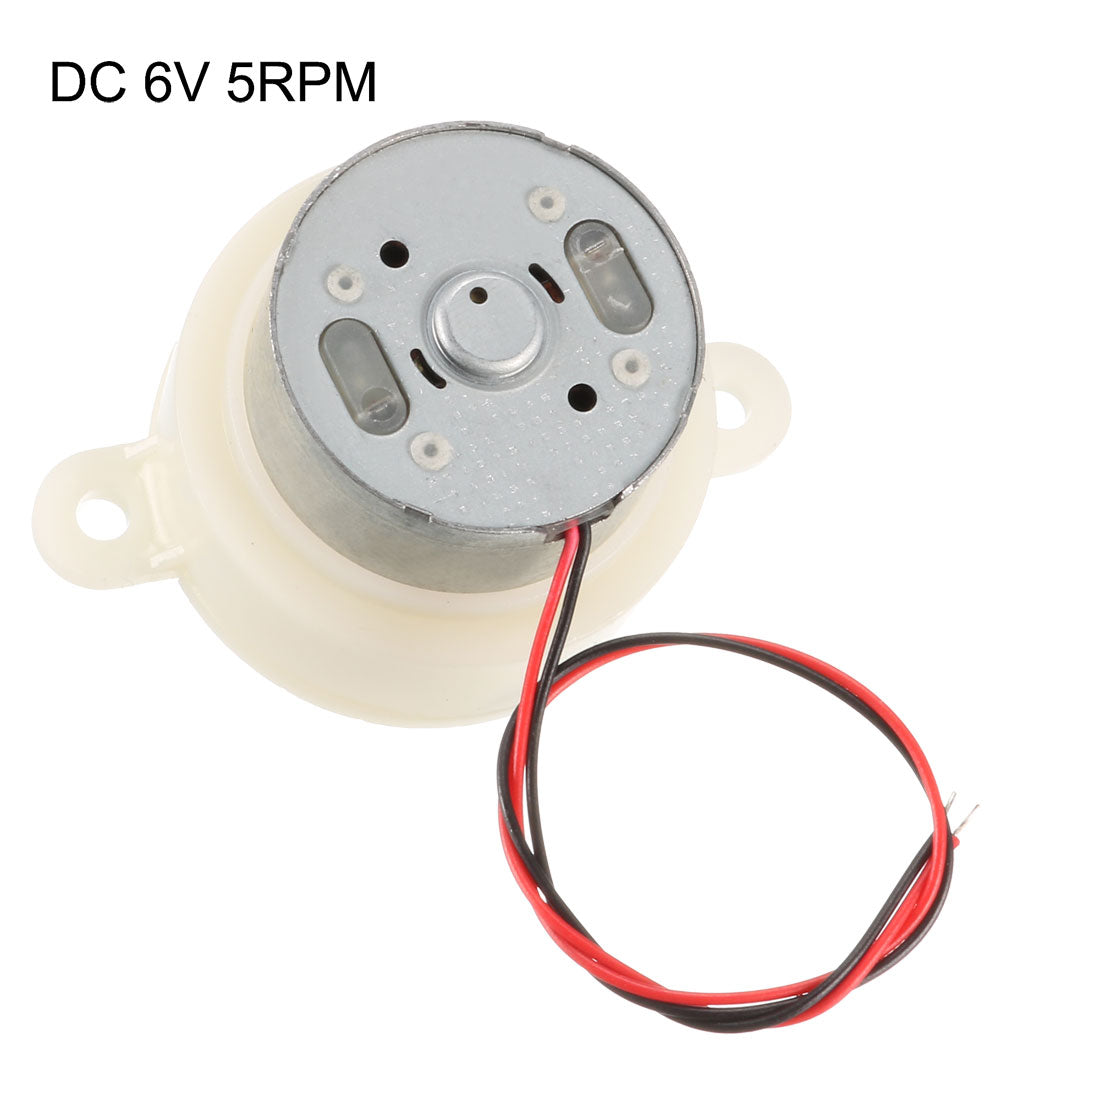 uxcell Uxcell 2PCS DC 6V 5RPM High Torque Rotary Speed Dual Flat Tapping Shaft Deceleration Reducing Motor, 2-Wire Connecting